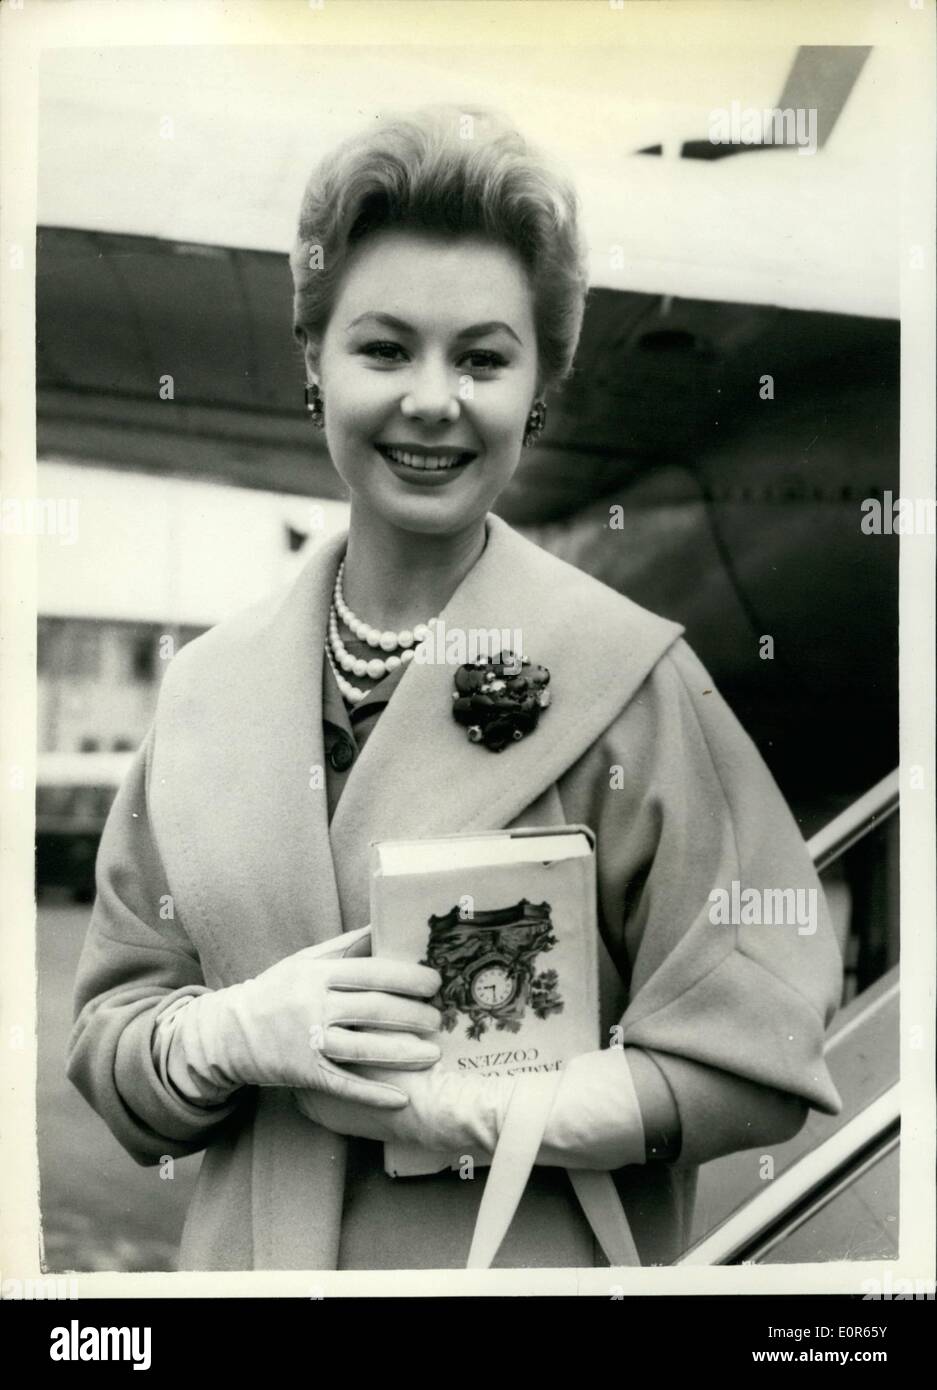 Apr. 04, 1958 - Mitzi Gaynor arrives for premiere of South Pacific . Mitzi Gaynor and husband Jack Bean, arrived at London Airport today for the premiere of Mitzi's South Pacific in London on April 21st. Keystone Photo Shows: Mitzi Gaynor pictured on arrival at London Airport today. H/Keystone Stock Photo